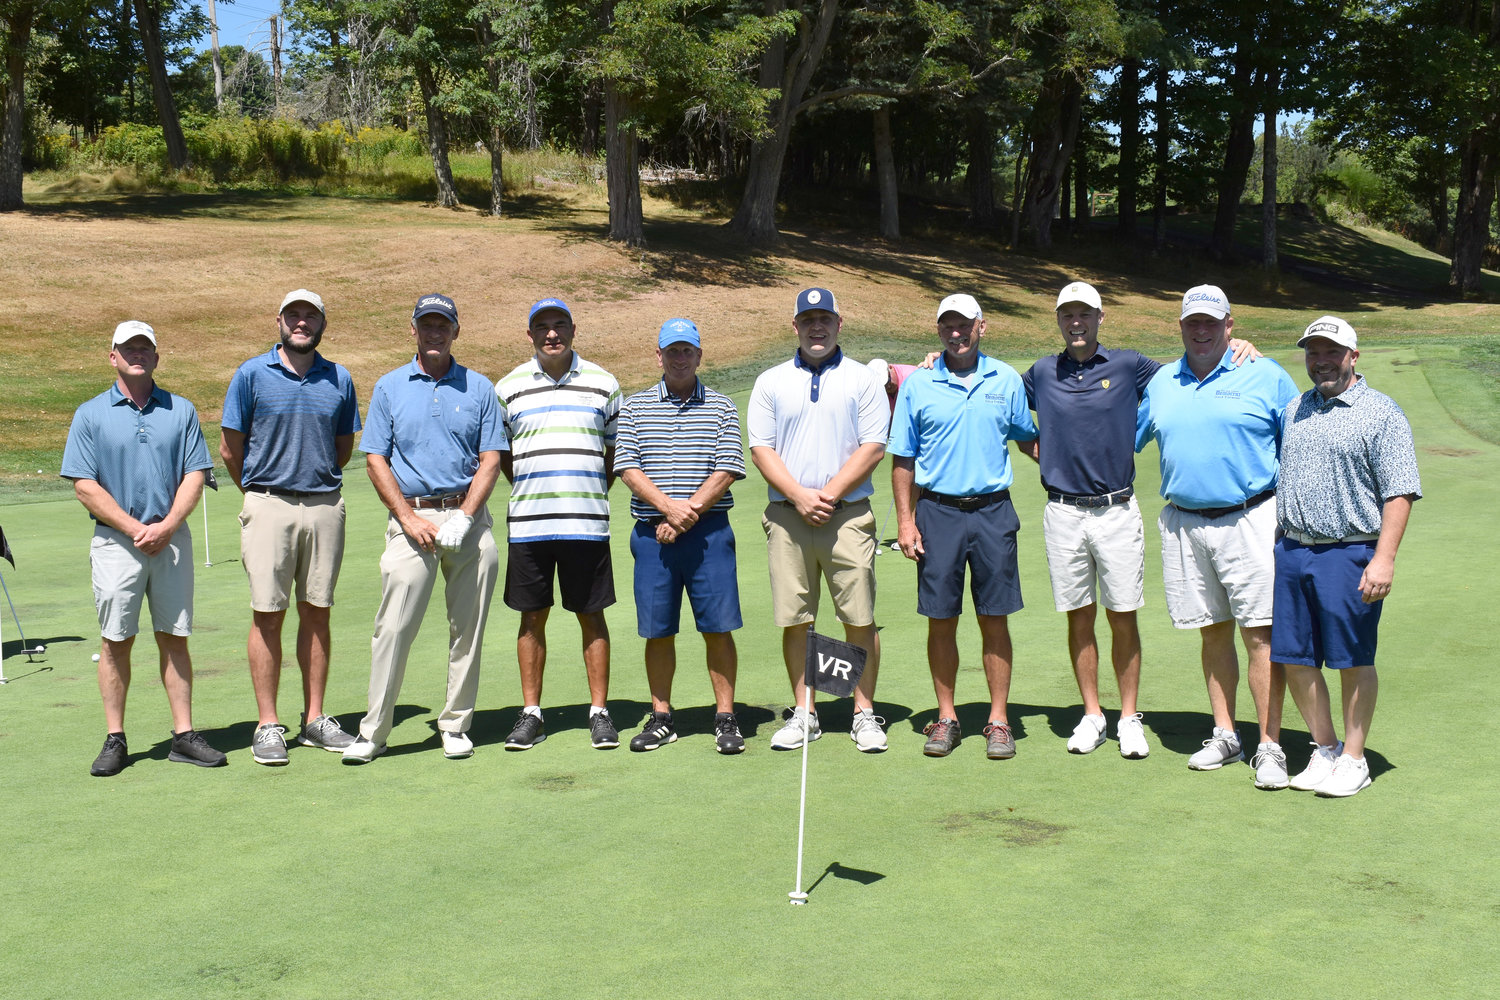 Past Champions who returned in 2022

Eleven past champions of the Sullivan County Democrat Golf Tourney returned to this year’s field to compete for the title. The 11 champions have won a combined 40 titles over the course of the 41-year tournament. They are, from the left, Jared Kubenik (2017), Gregg Semenetz Jr. (2017), Mitchell Etess (1982, 1983, 1994), Ken Cohen (1984, 1987, 1992, 1994, 1997, 1999, 2004, 2005, 2012), Billy Phillips (2001, 2002), Joe Winksi (2006, 2007, 2010, 2011, 2018, 2020, 2021, 2022), Gregg Semenetz Sr., (2001, 2002) Sean Semenetz (2003, 2006, 2007, 2010, 2011, 2018, 2020, 2021, 2022), Kort Wheeler (1993, 2015) and Walter Herzog (1995, 2015). Missing from the photo was Patrick Murtagh (1998).